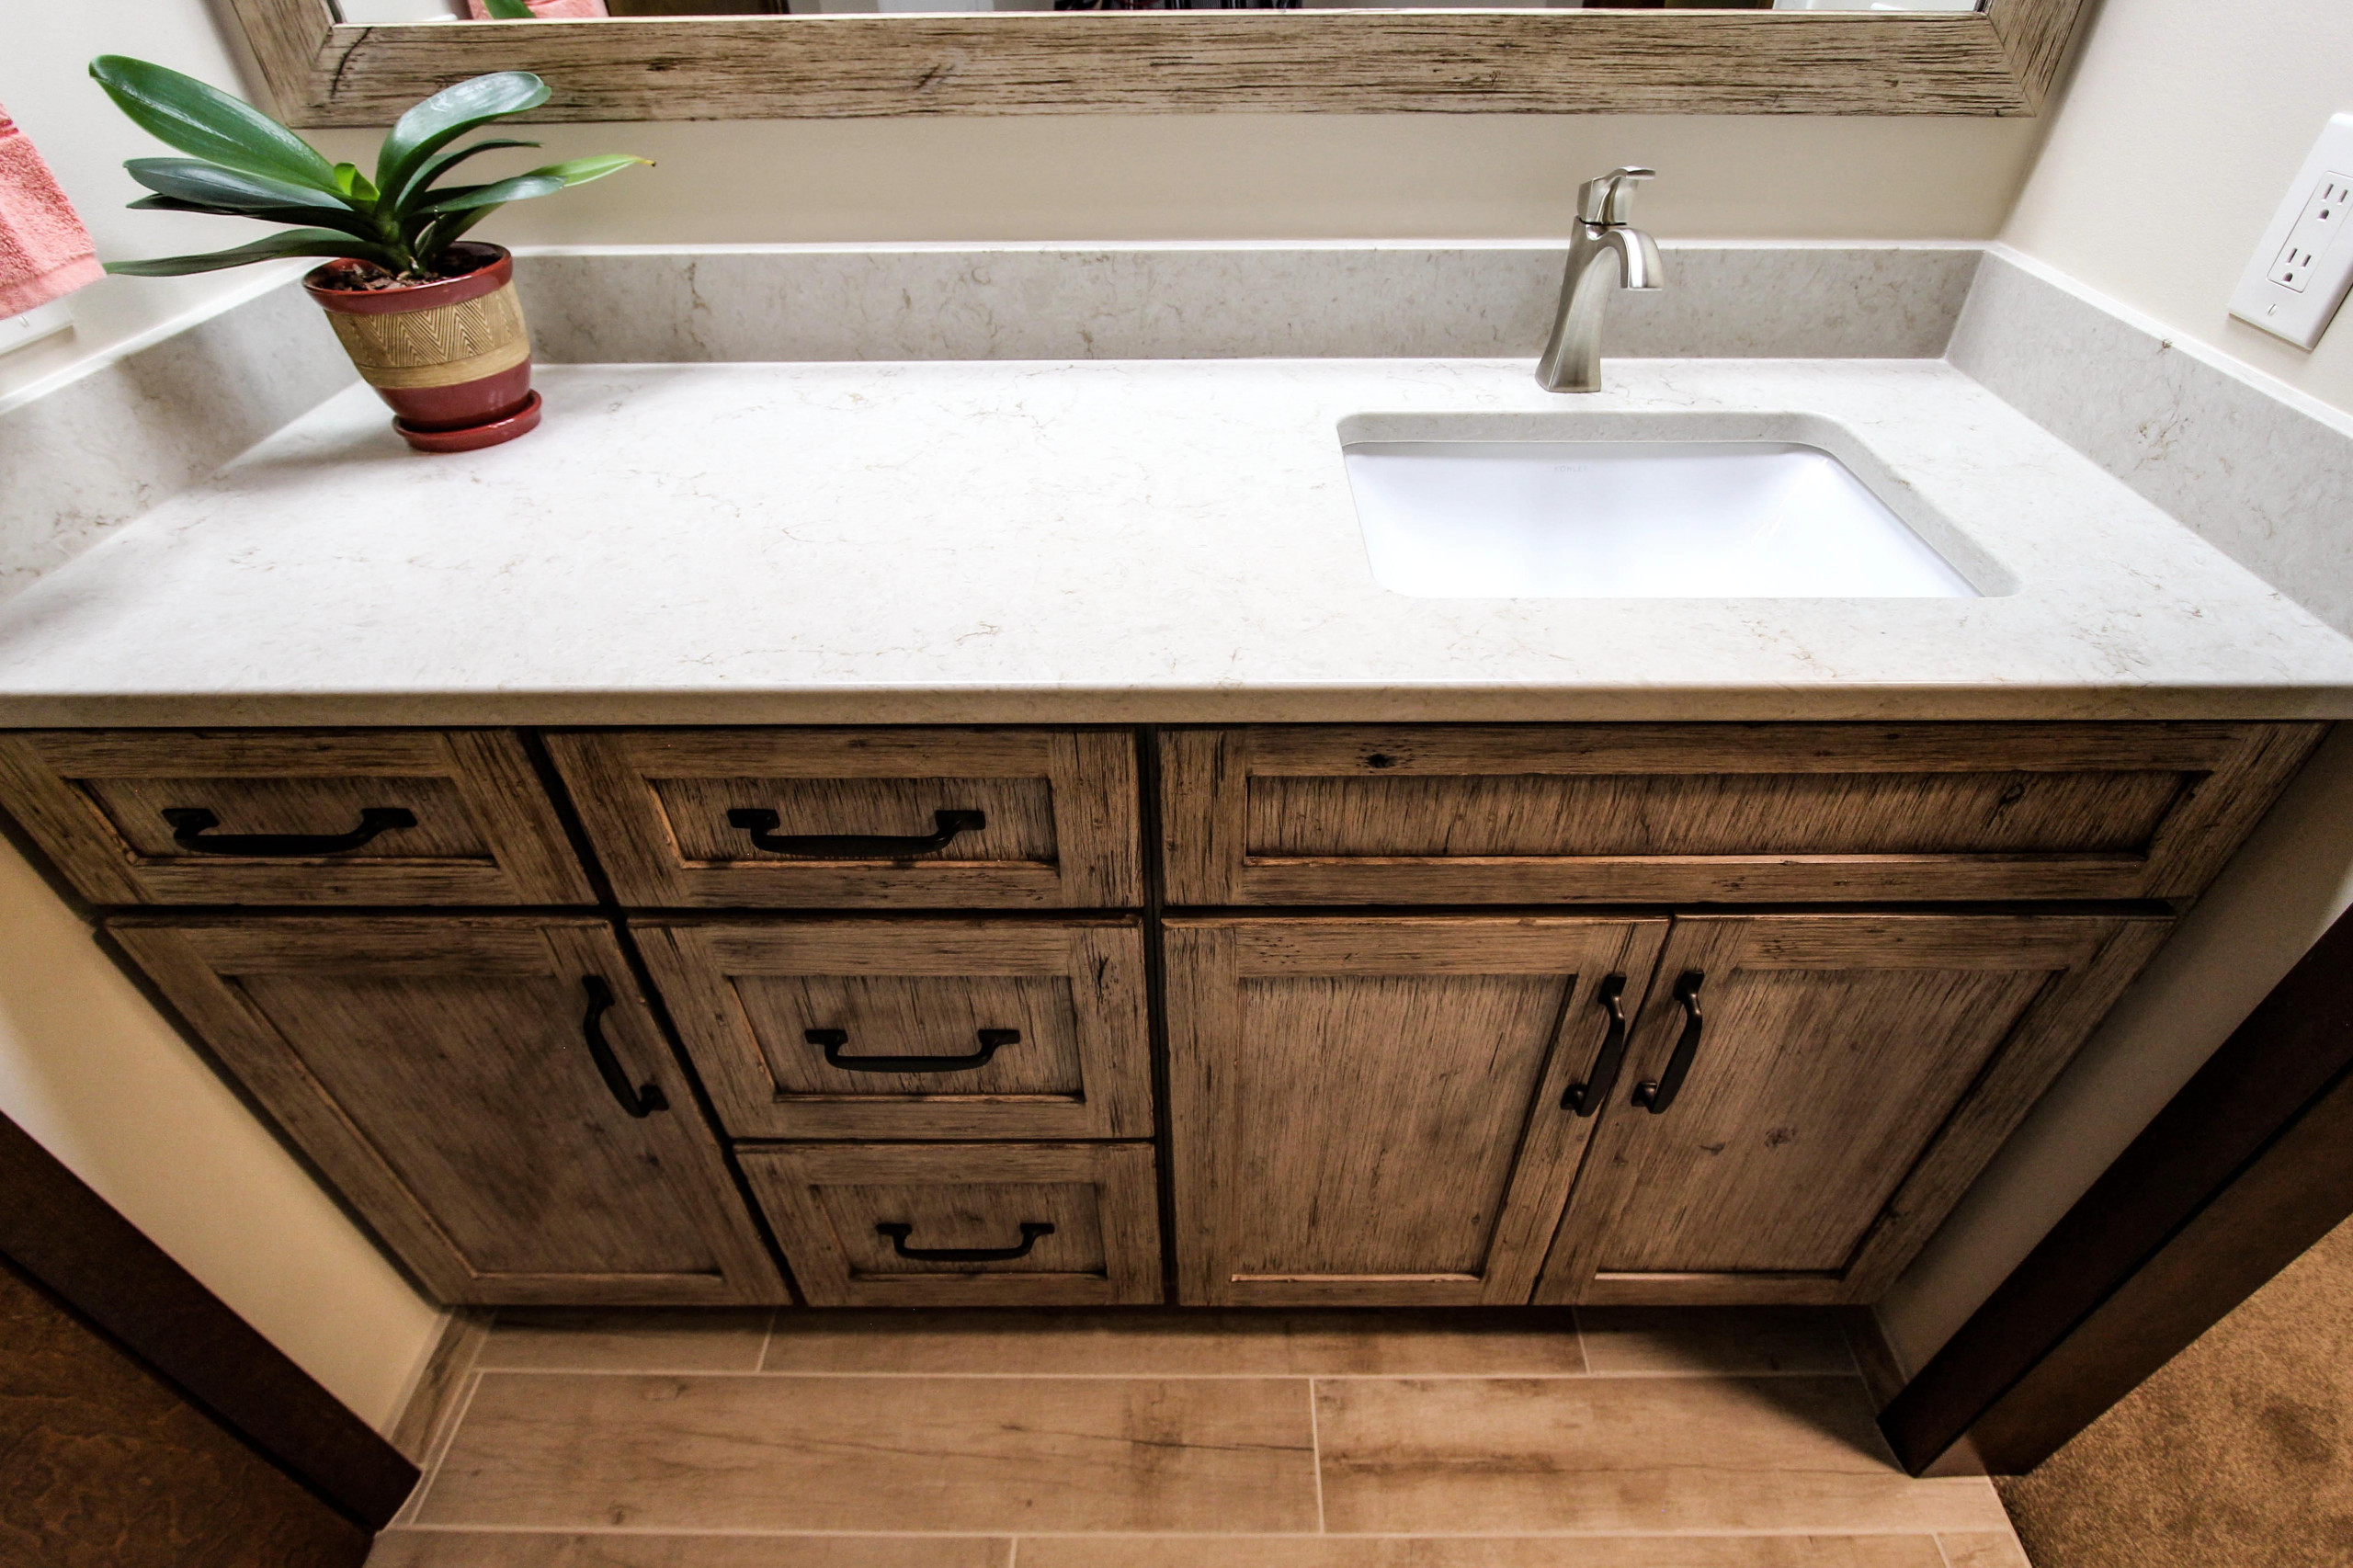 Medallion Knotty Alder Bathroom Vanity and Eternia Quartz Countertop -  Traditional - Bathroom - Cleveland - by Cabinet-S-Top | Houzz